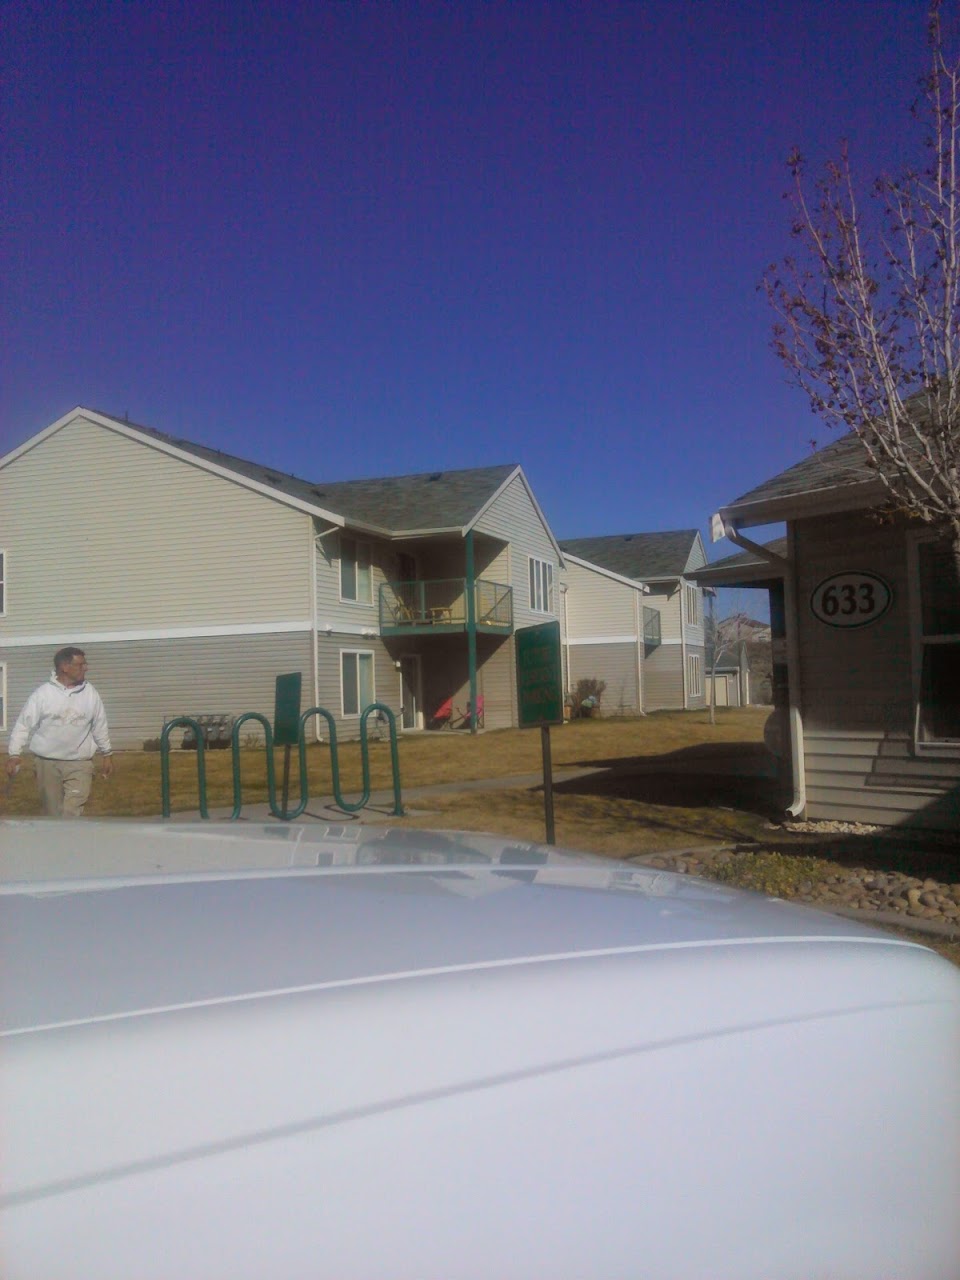 Photo of SIERRA SPRINGS APARTMENTS at 633 HOT SPRINGS RD. CARSON CITY, NV 89706